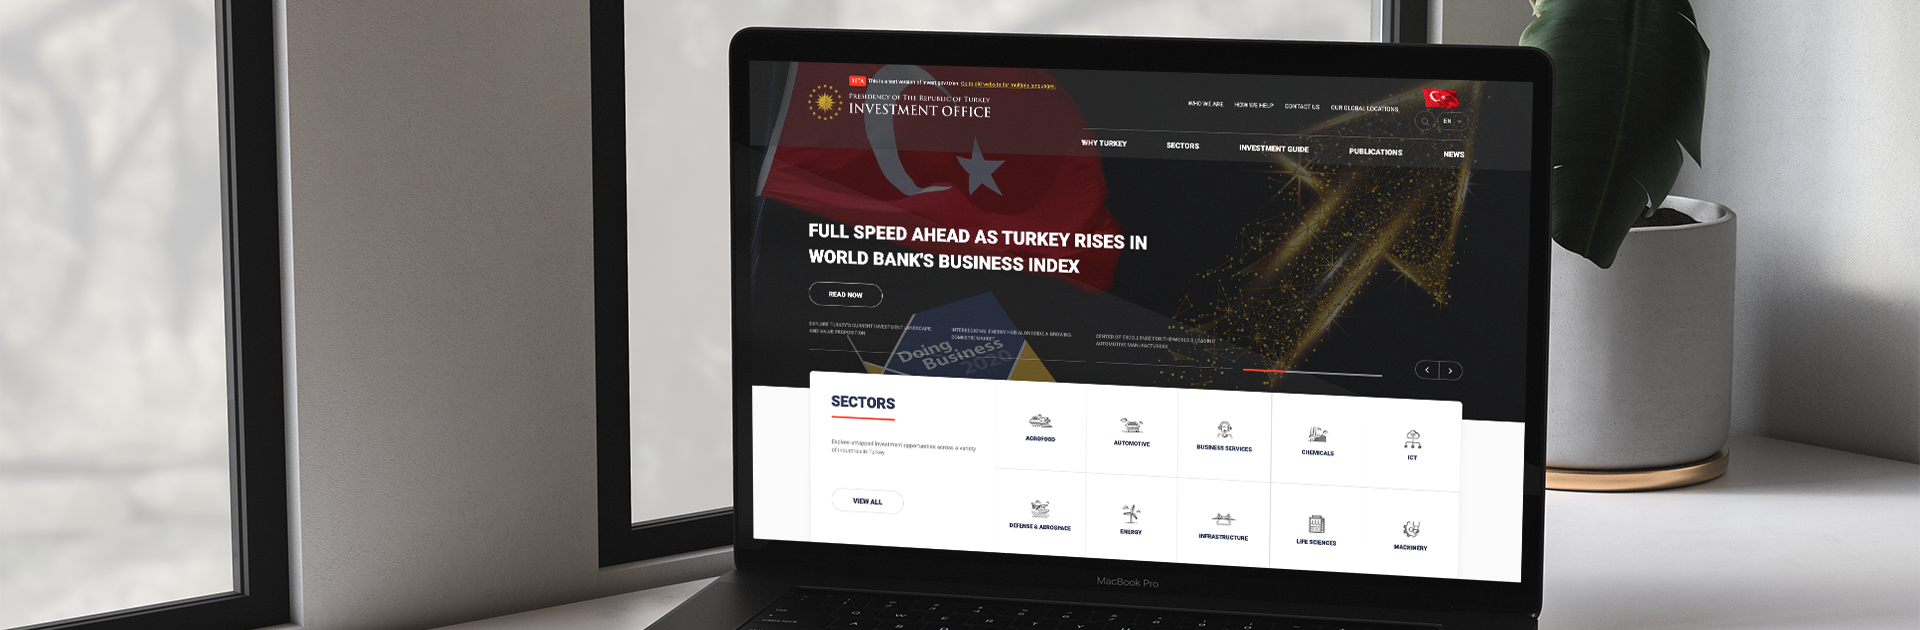 Presidency Investment Office Website Goes Live with New Design